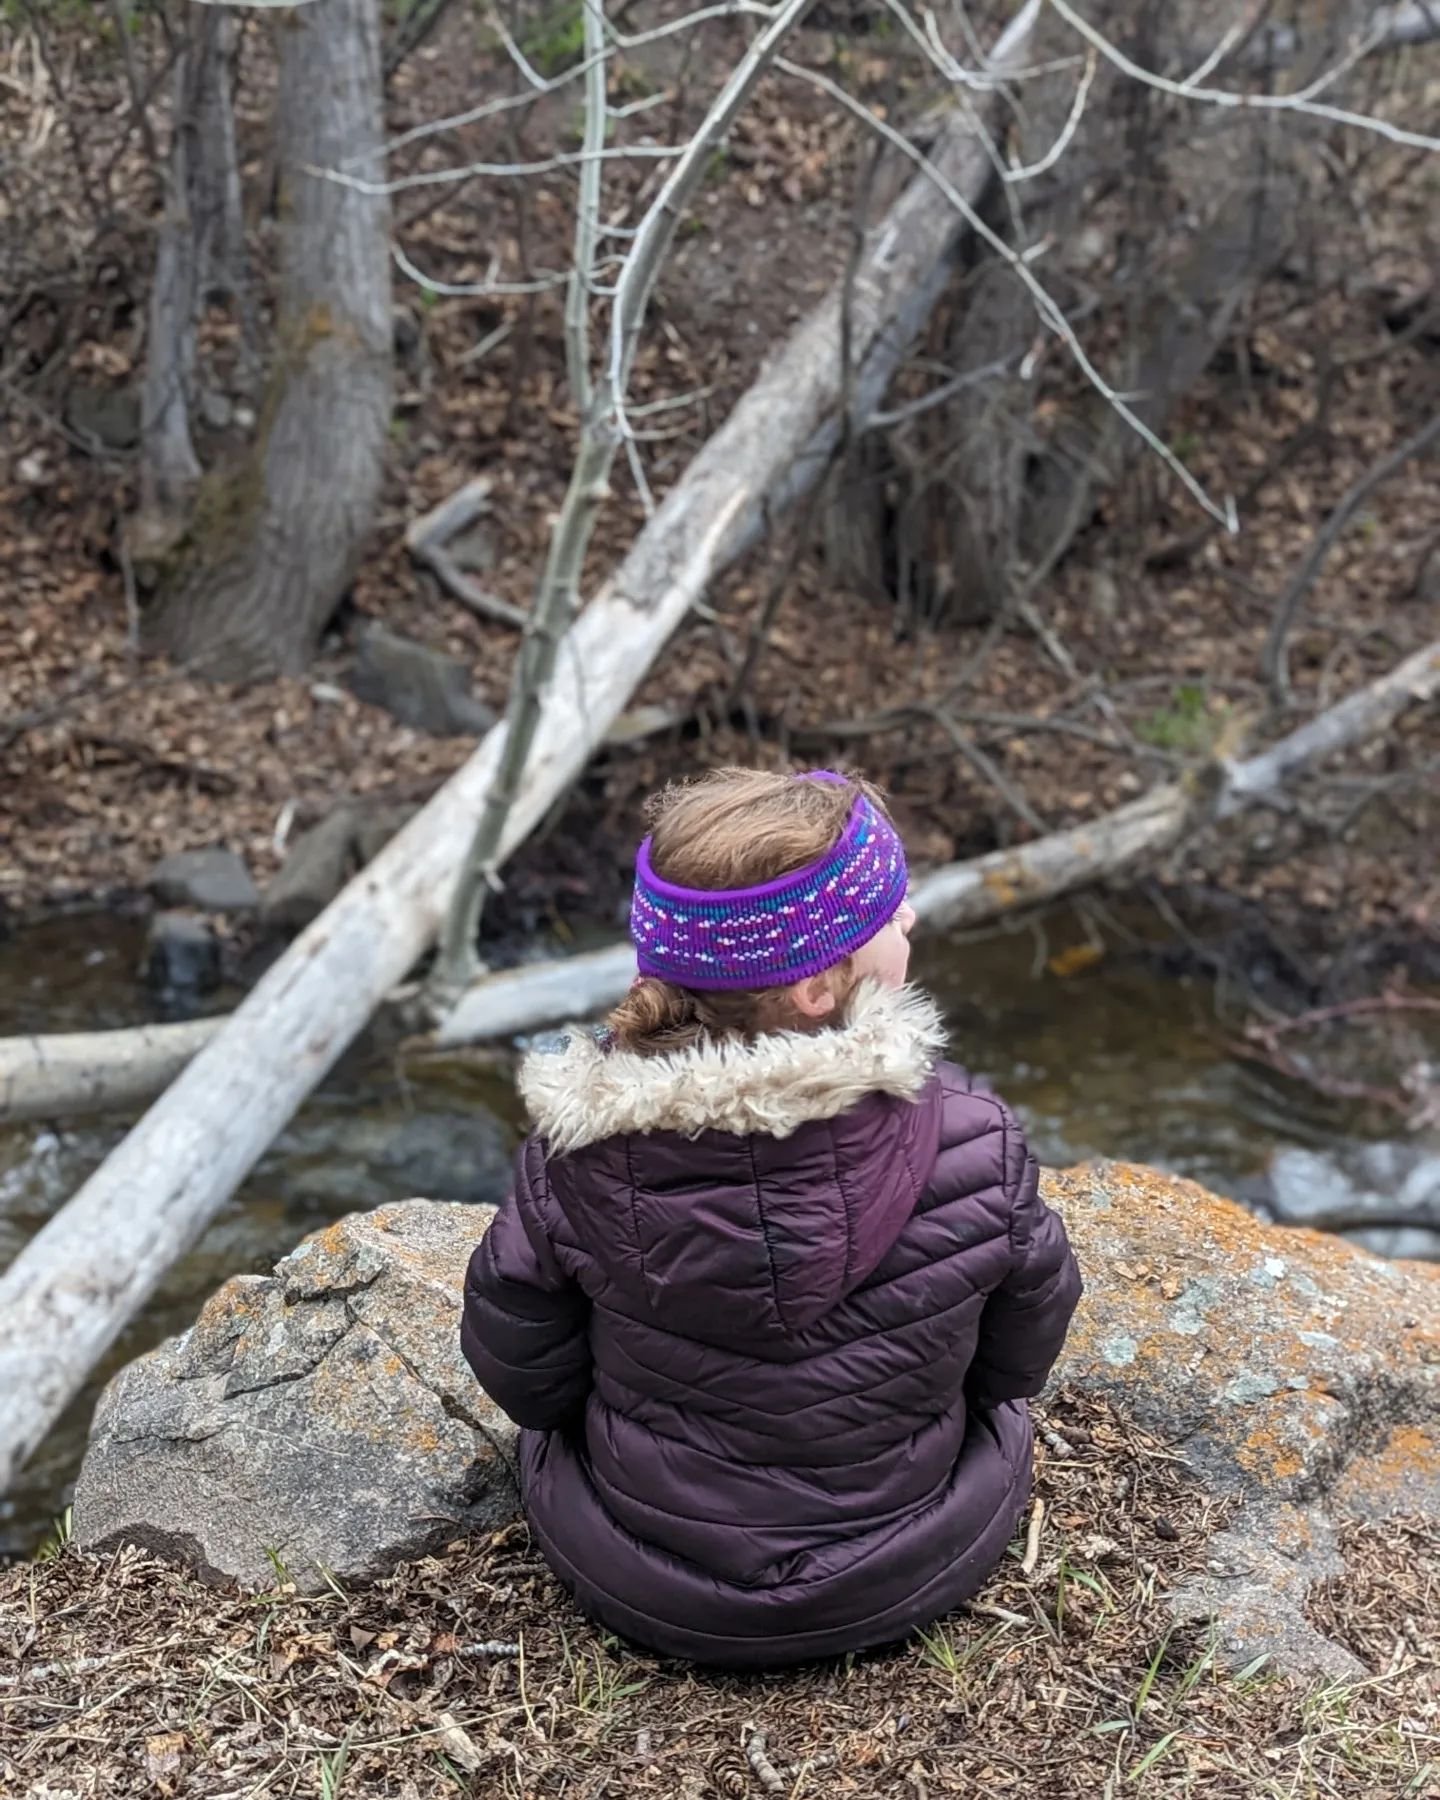 Forest school is just as much about the being as it is the playing. Every now and then a child will freely choose a spot to sit without being prompted to, and that child will simply just be and observe their surroundings. We all need moments like thi